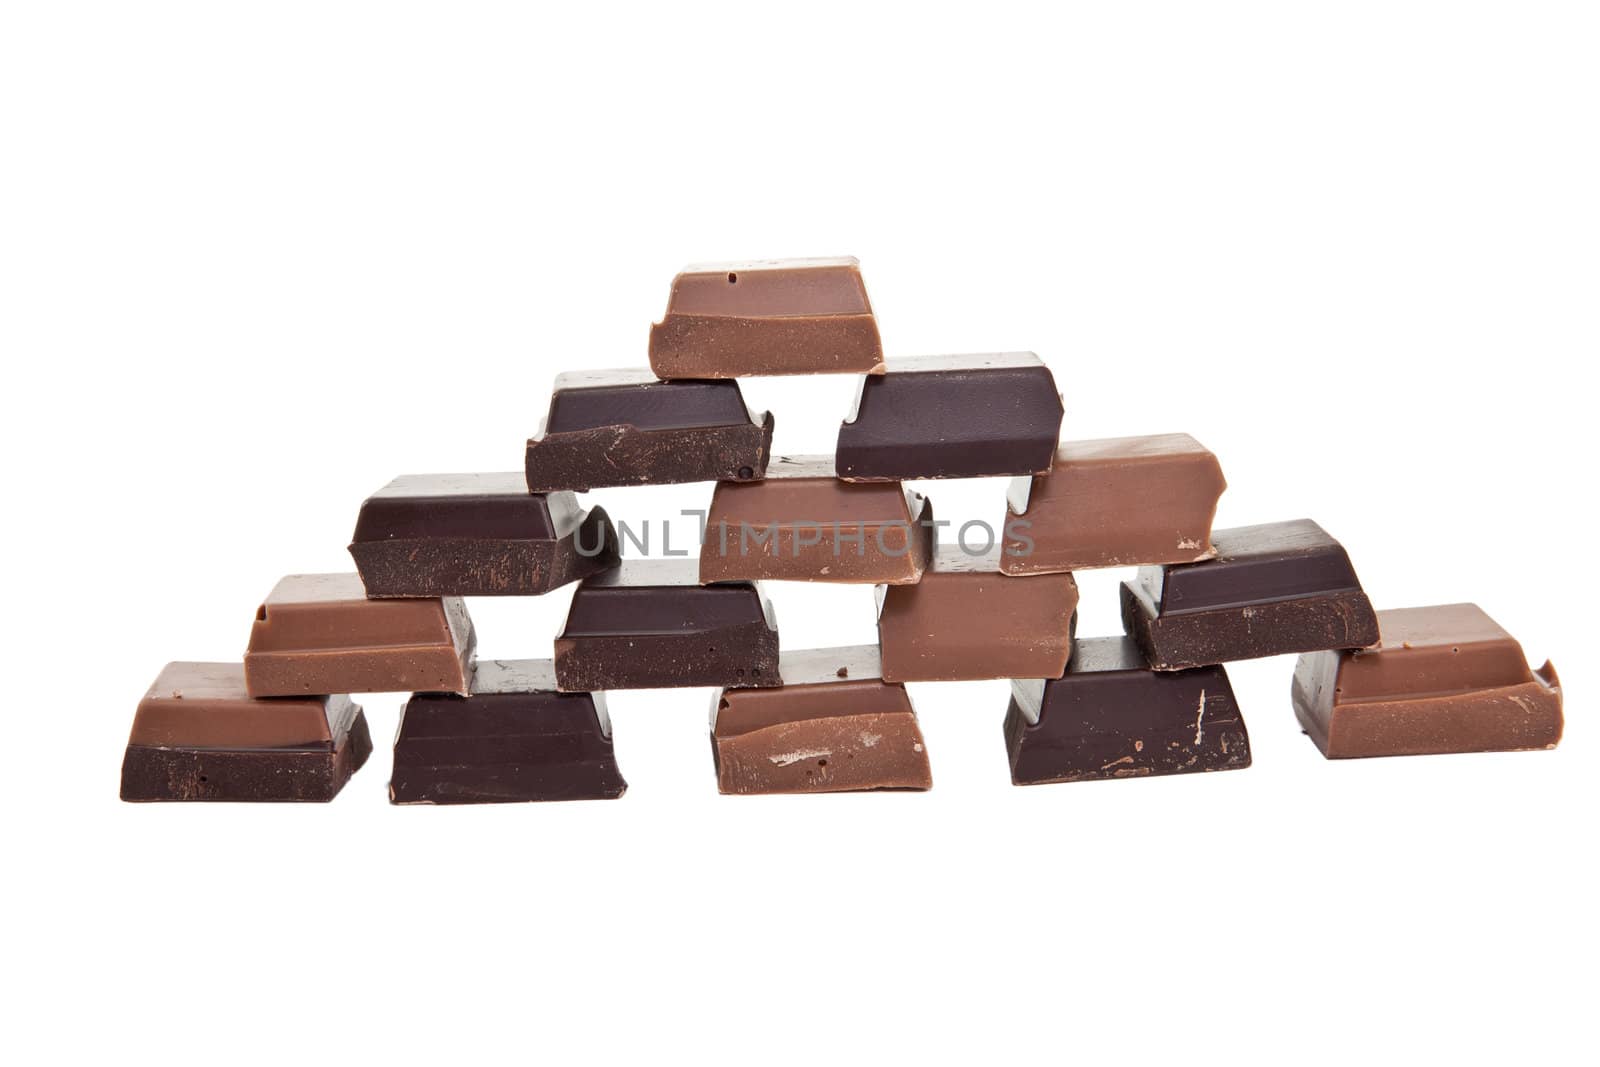 Picture of a chocolate pyramide from the front